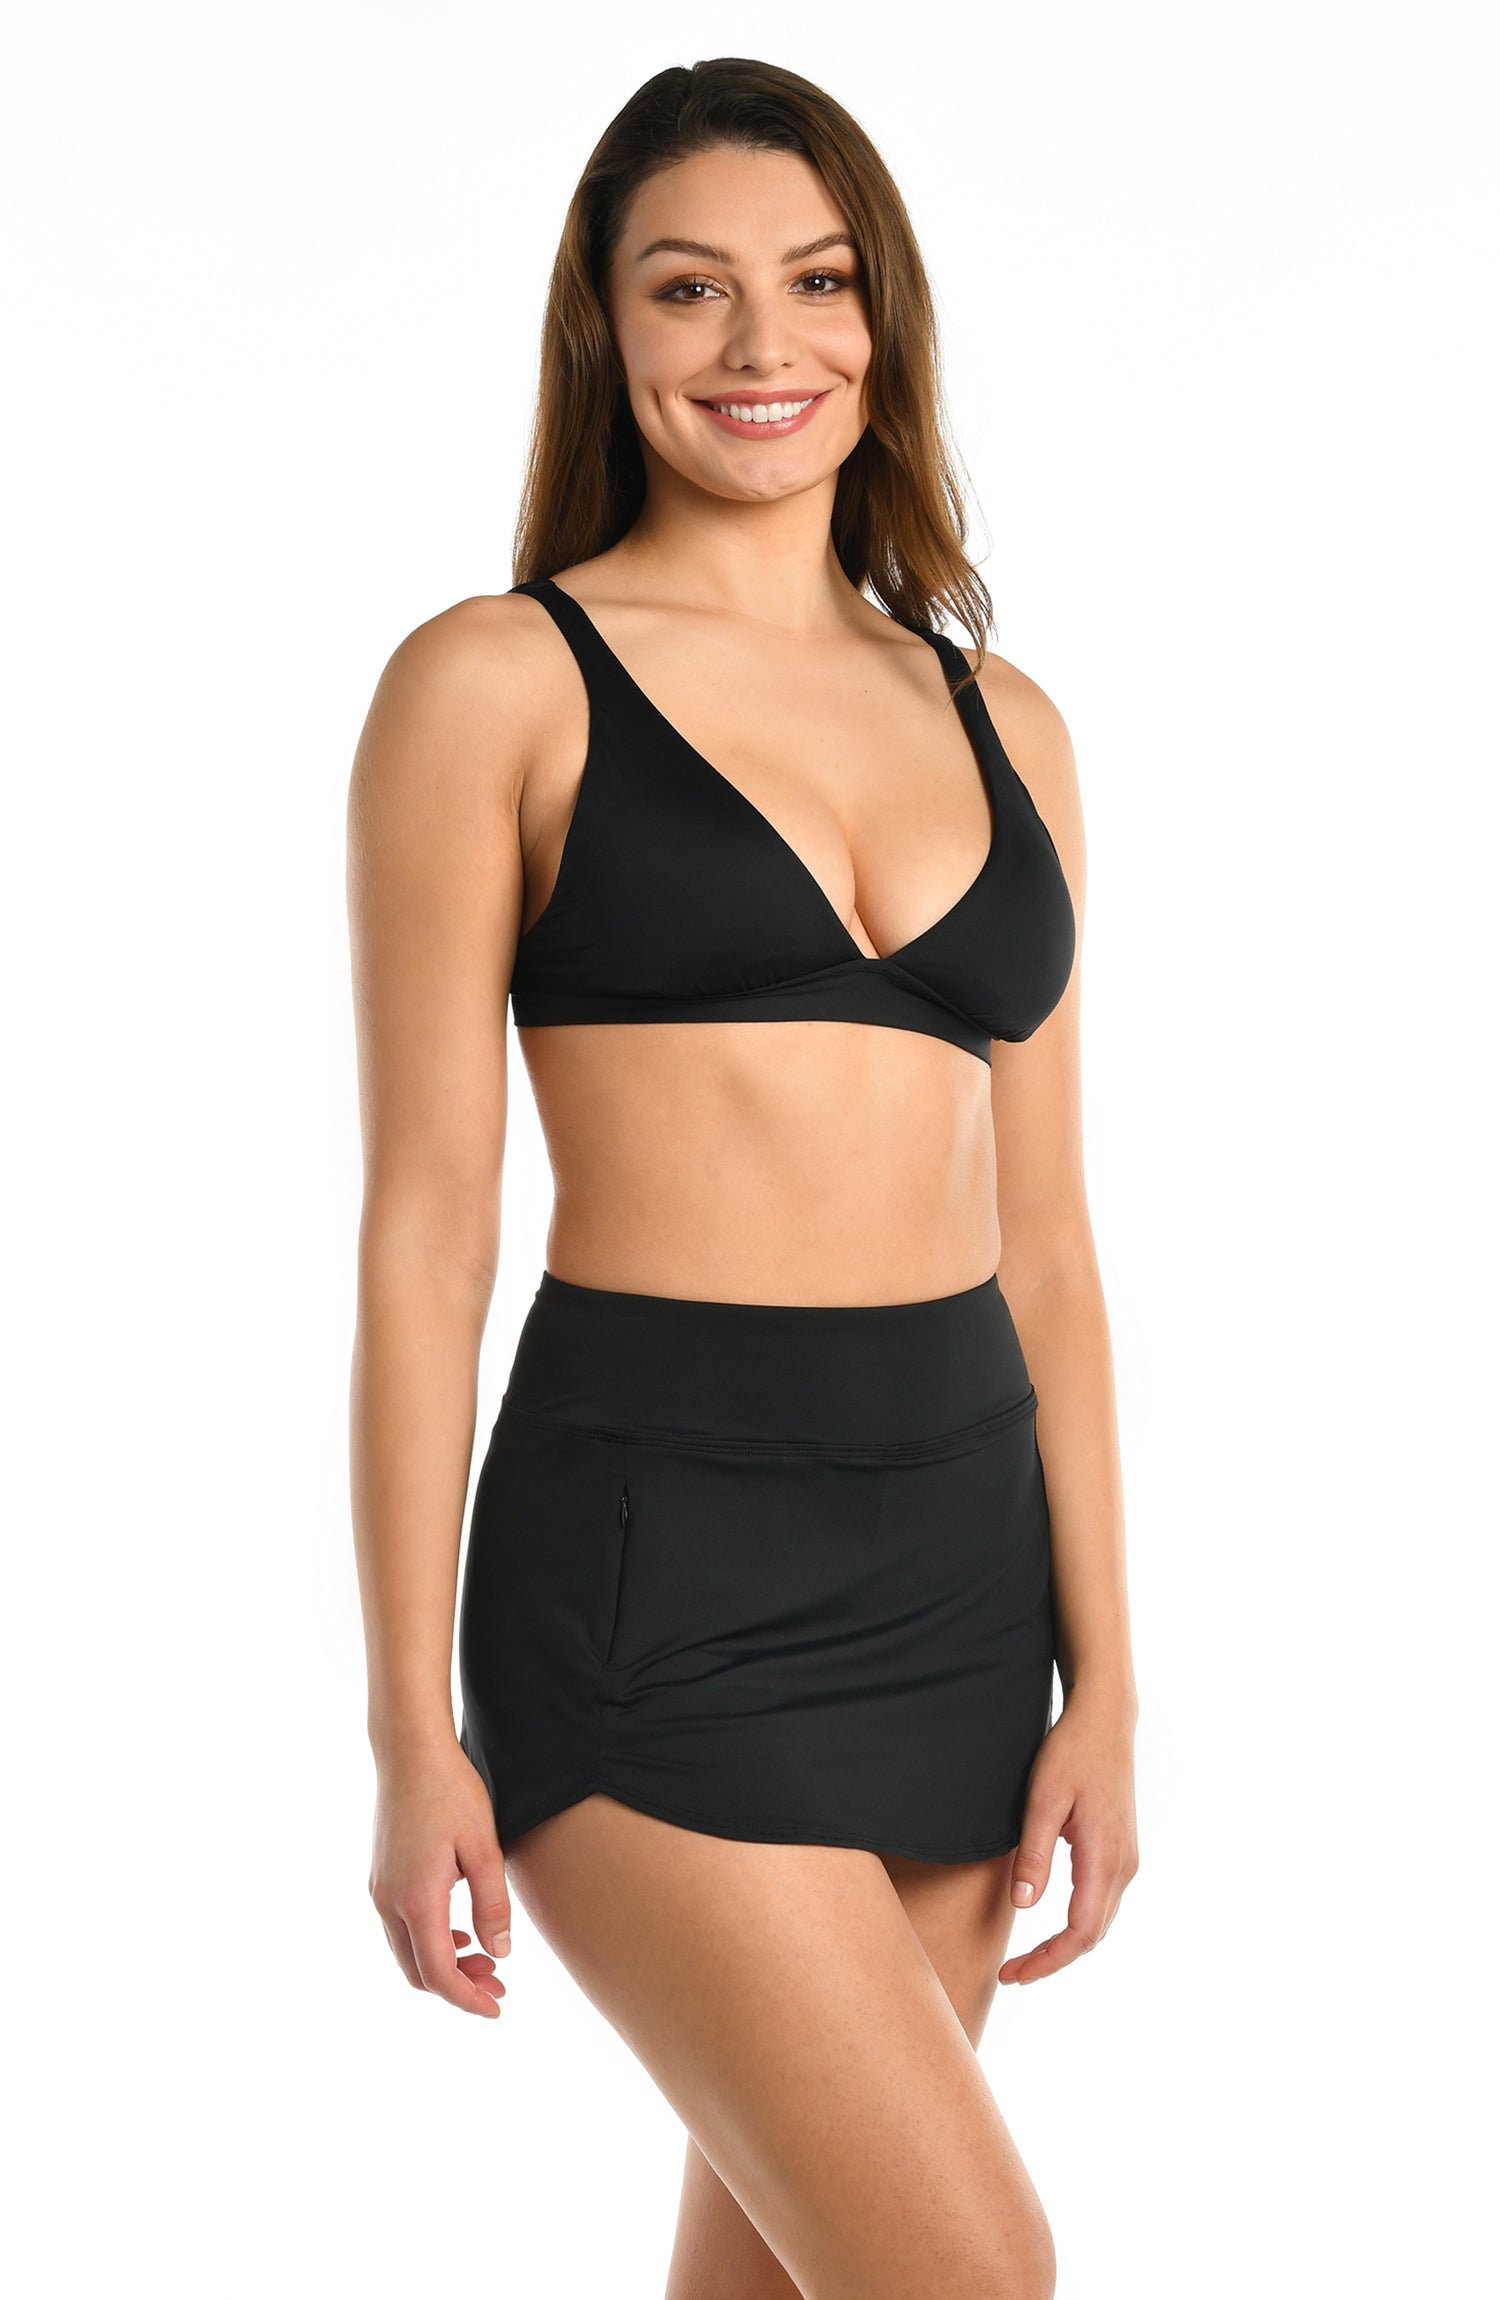 Model is wearing a black skirted swimsuit bottom from our Best-Selling Island Goddess collection.